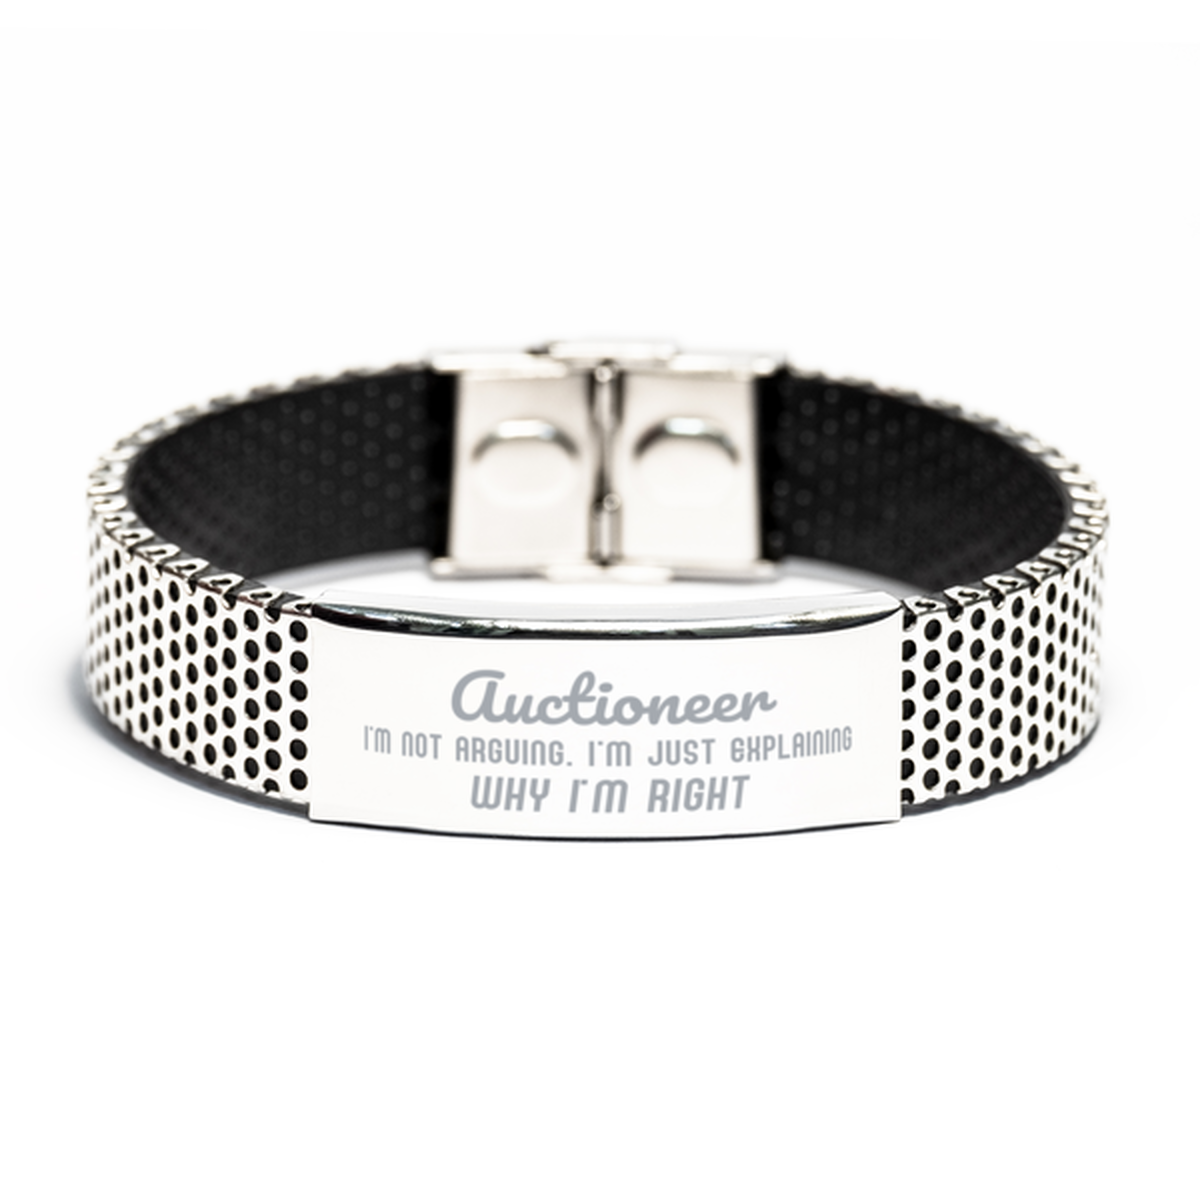 Auctioneer I'm not Arguing. I'm Just Explaining Why I'm RIGHT Stainless Steel Bracelet, Funny Saying Quote Auctioneer Gifts For Auctioneer Graduation Birthday Christmas Gifts for Men Women Coworker